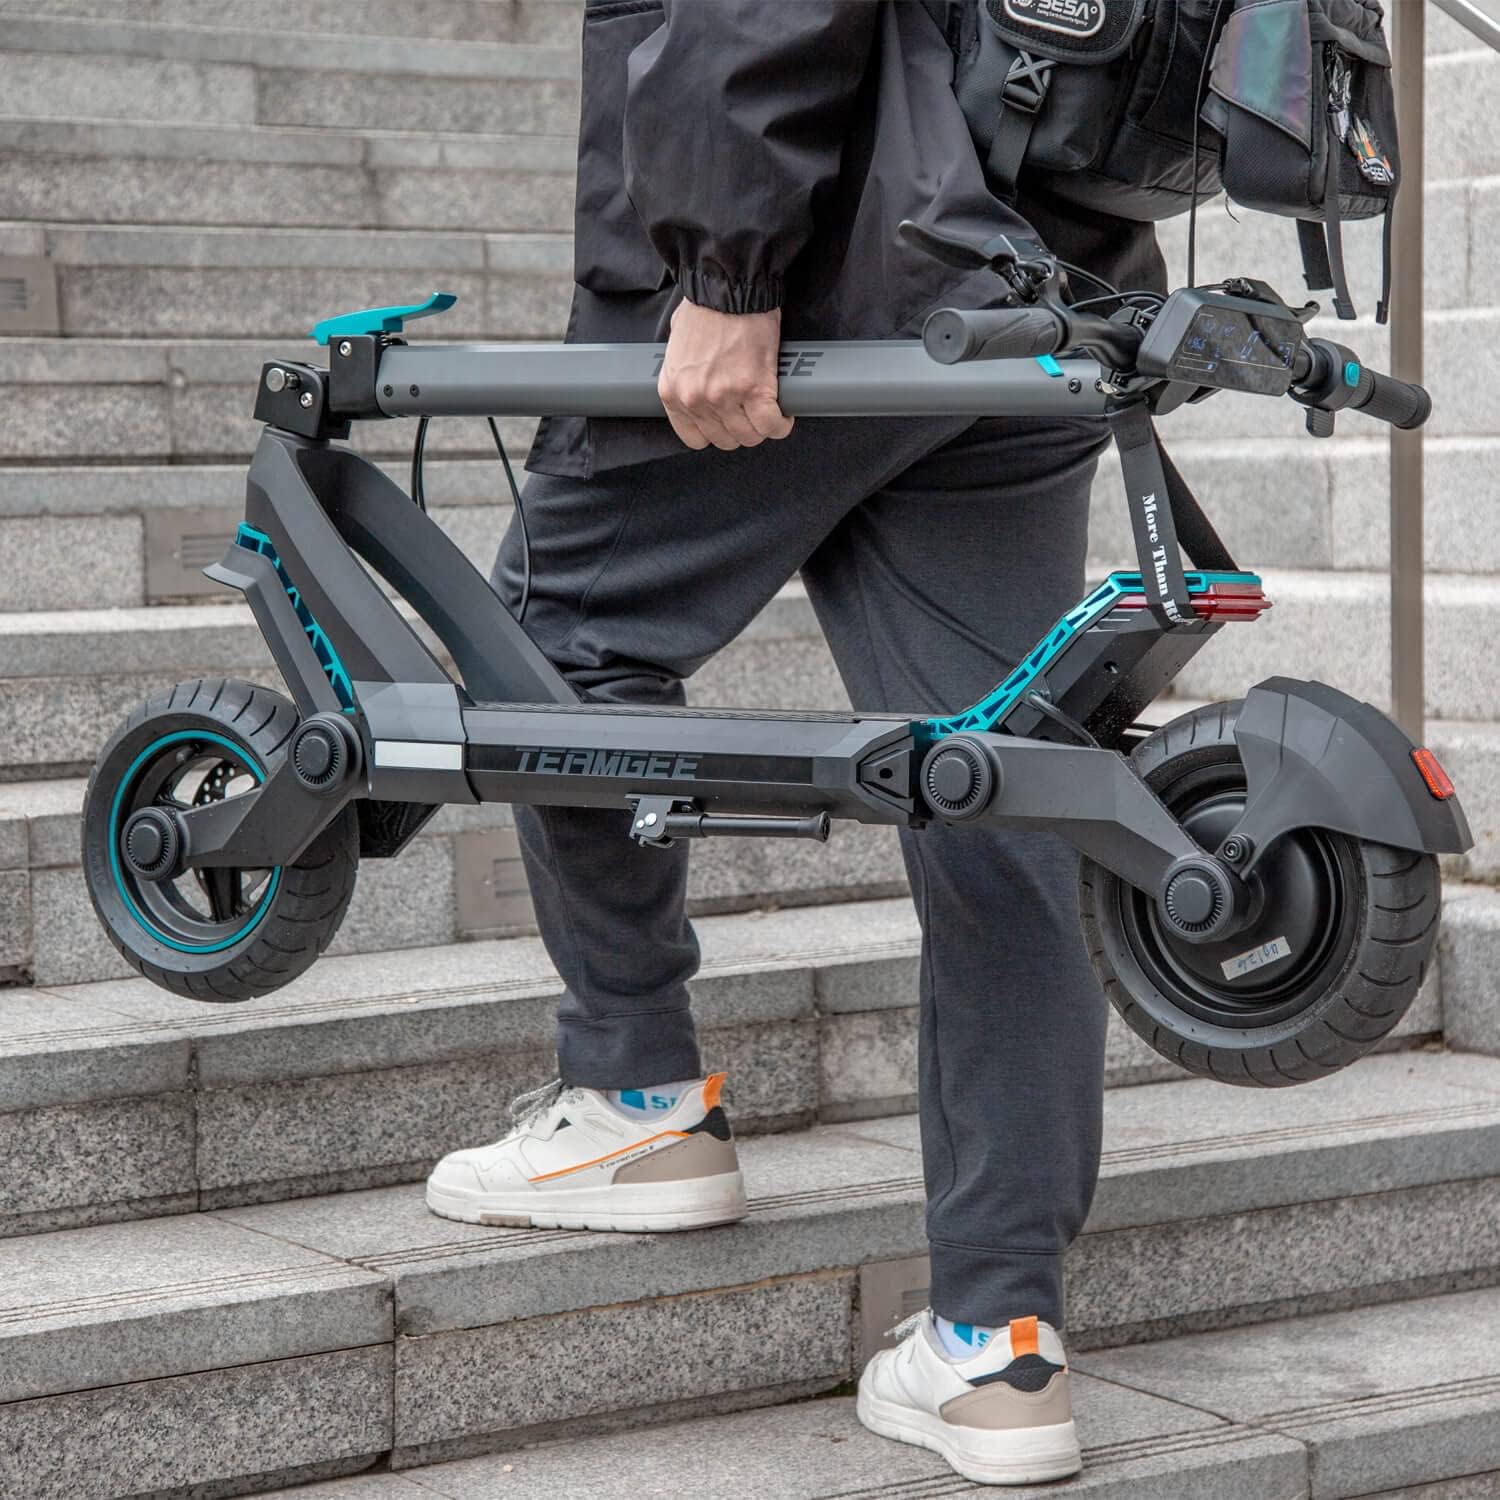 TEAMGEE G3 FOLDABLE ELECTRIC SCOOTER - ScootiBoo